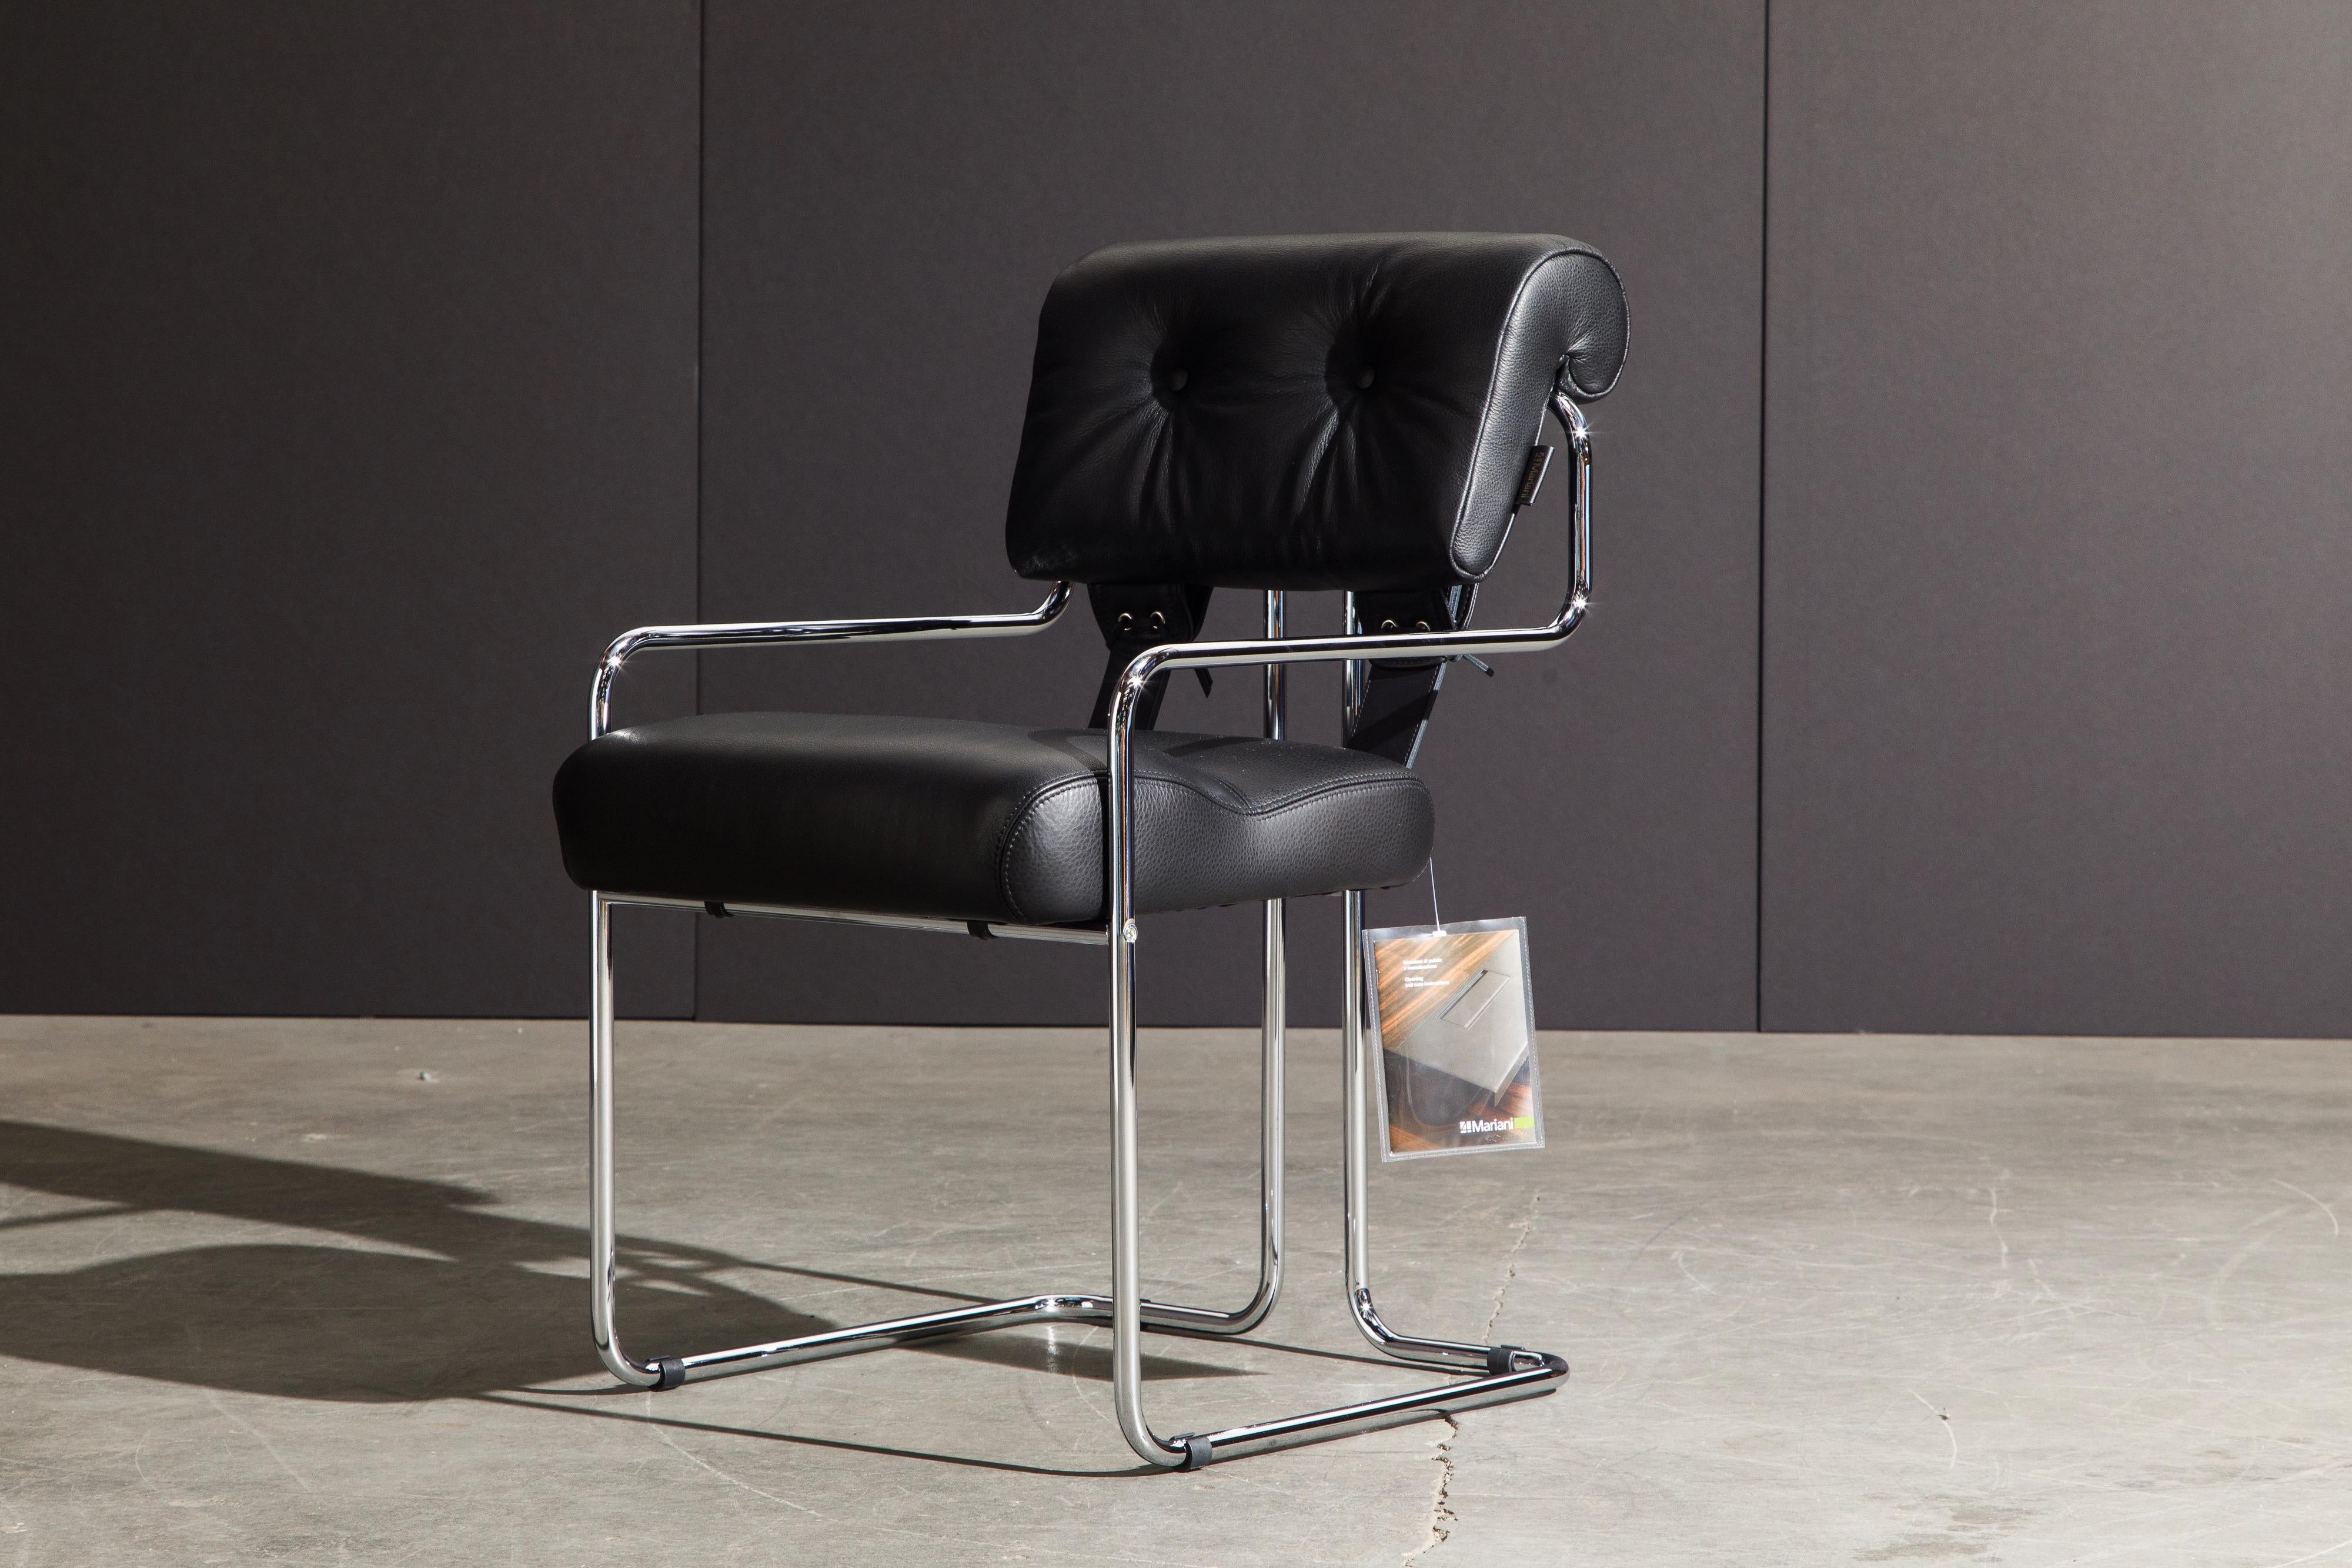 Currently, the most coveted dining chairs by interior designers are 'Tucroma' chairs by Guido Faleschini for i4 Mariani, and we have this incredible set of four (4) Tucroma armchairs in beautiful black leather with polished chrome frames. The seats